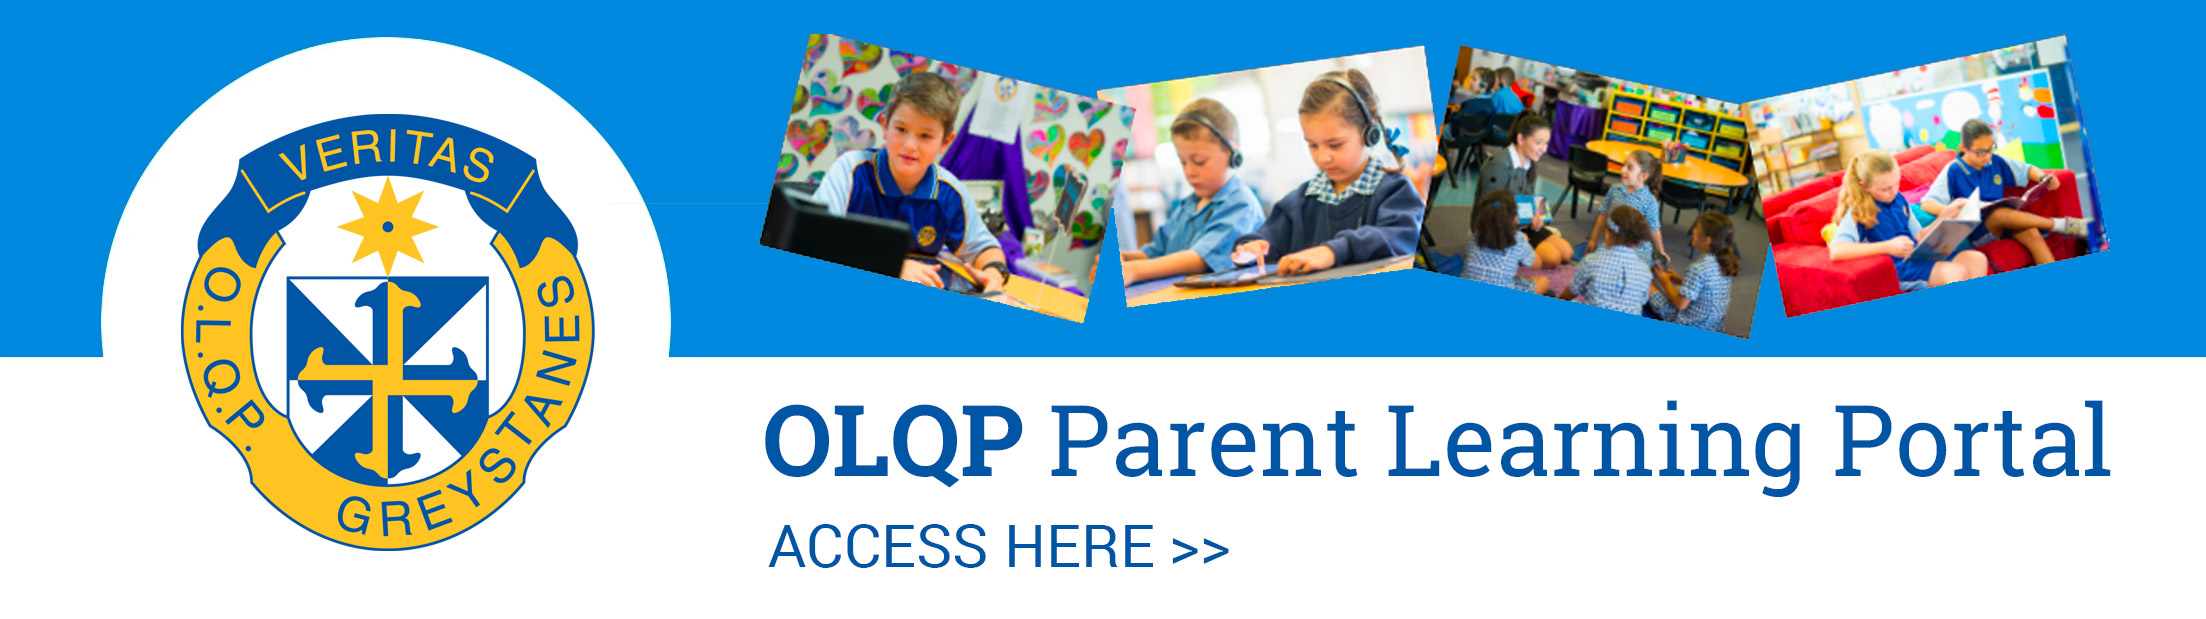 Access the OLQP Parent Learning Portal